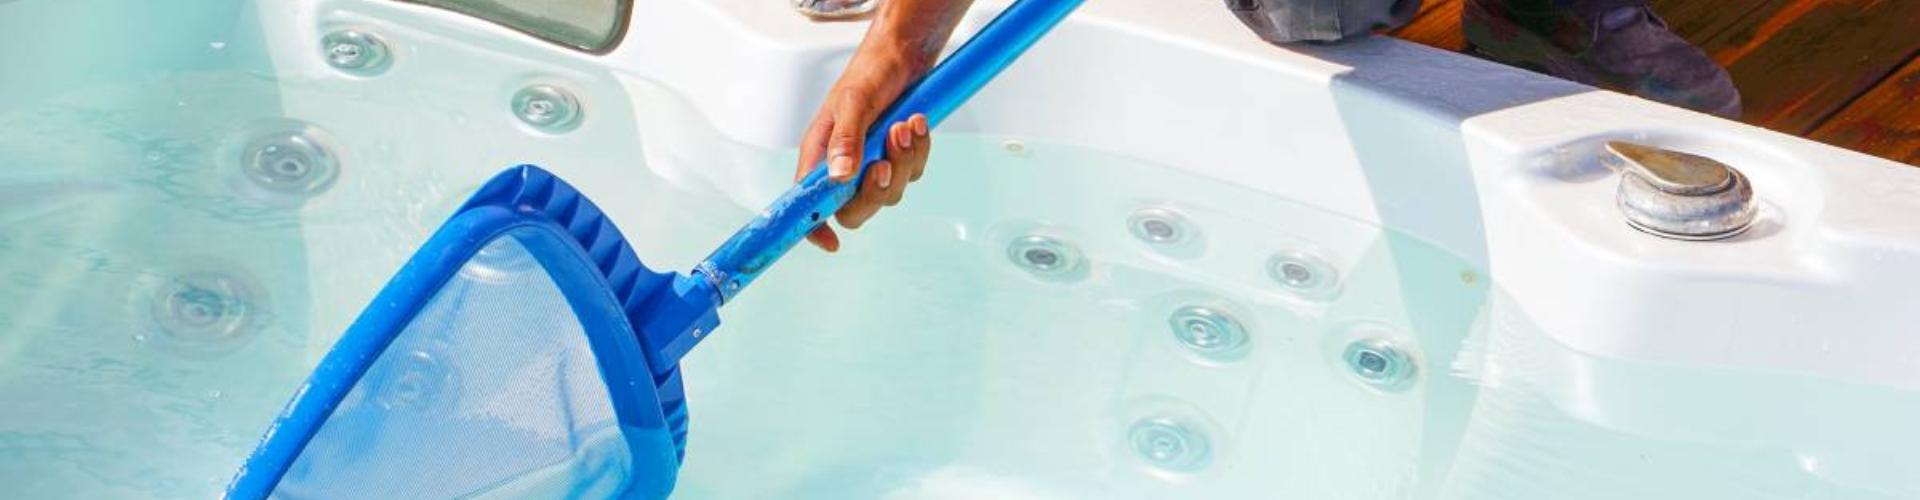 person holding a blue net to clean debris out if a tub